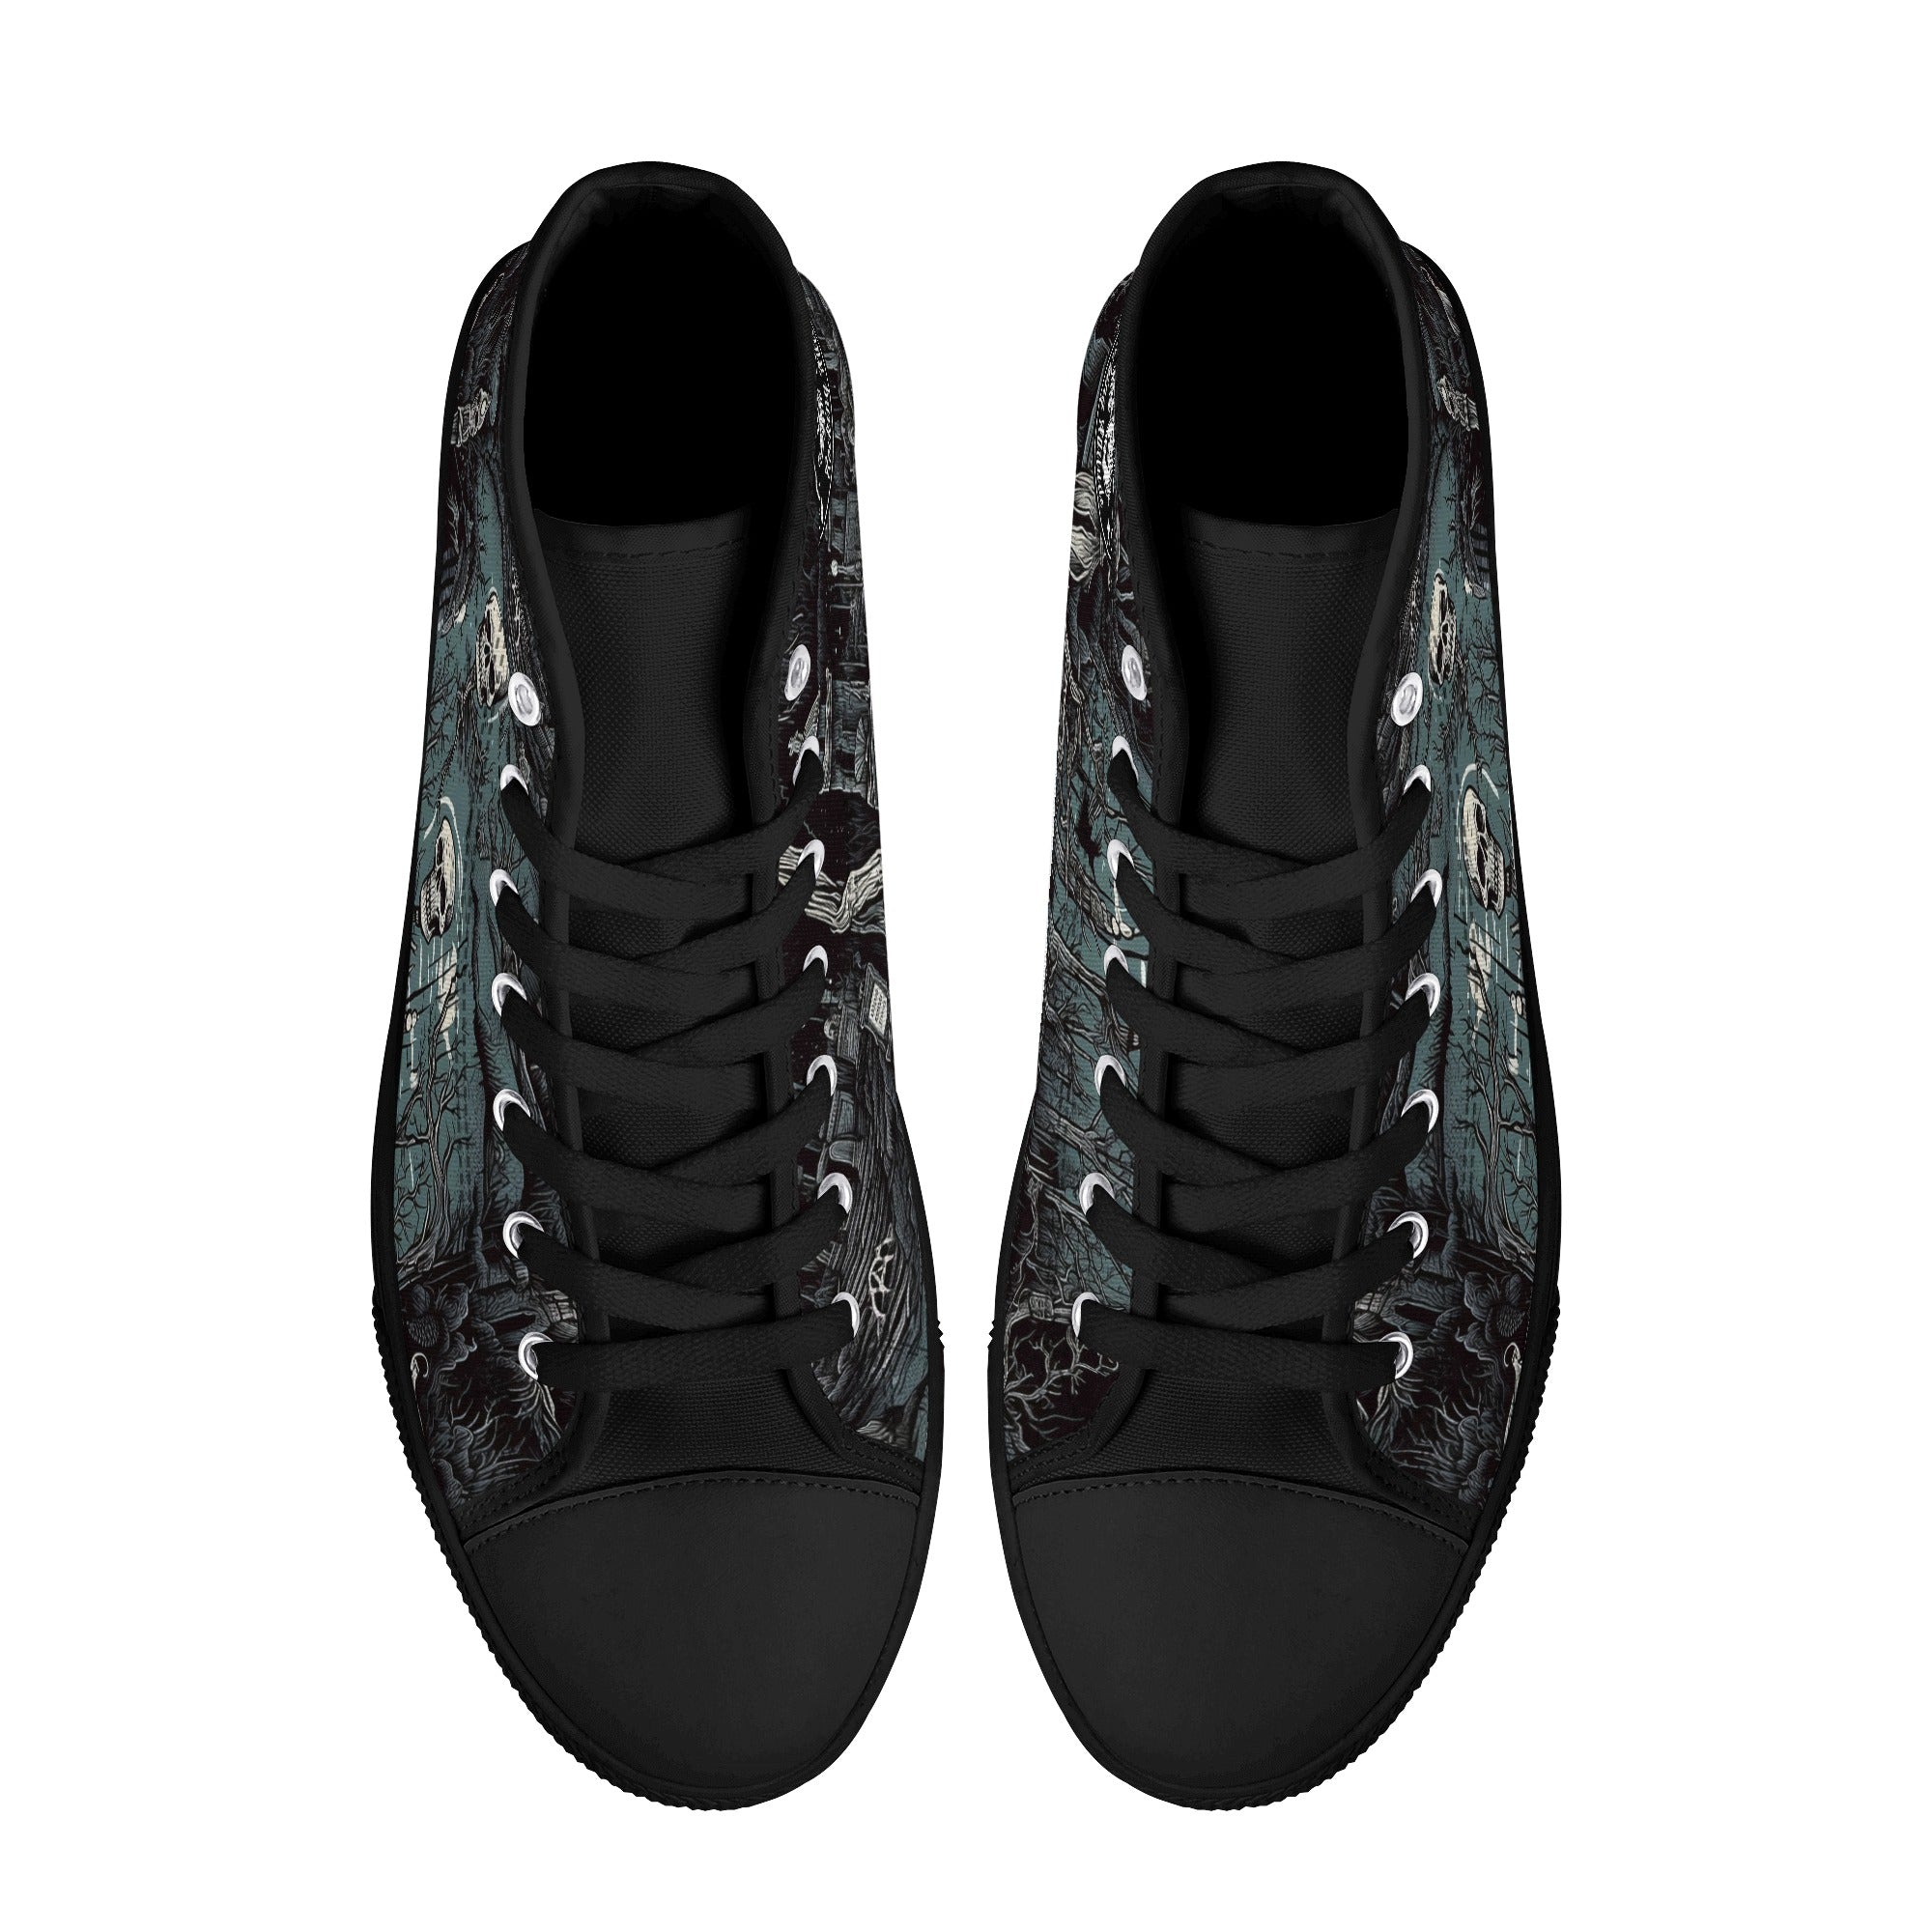 Haunted Scenery with Skulls Women's Psychobilly High Top shoes